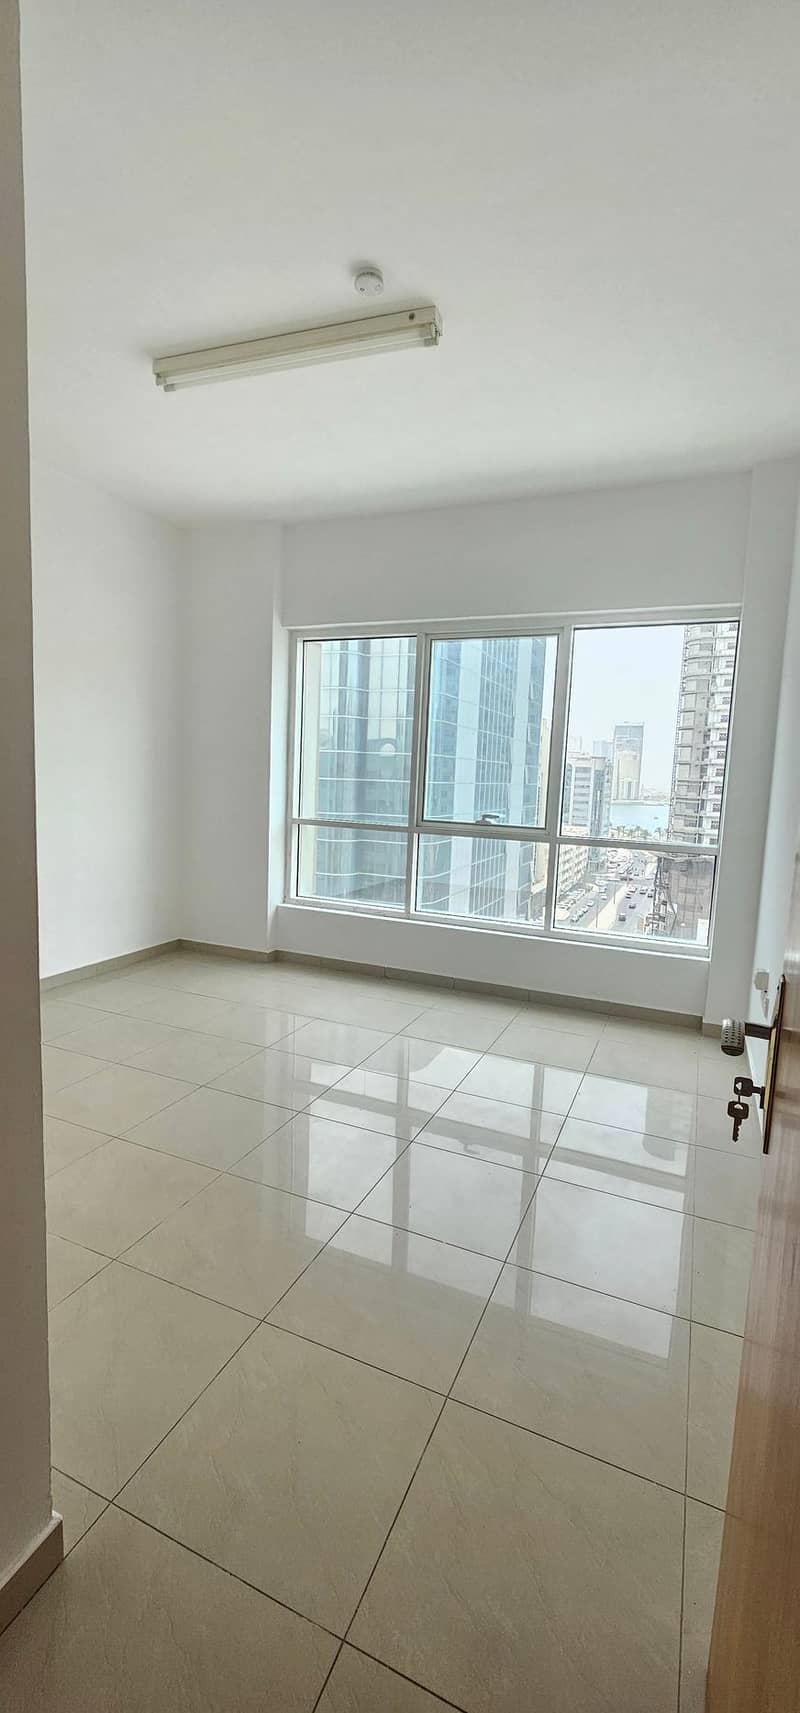 Spectacular 3Bhk Apartment with  Cornish view at very main location easy access to Al Wahda road for Dxb. . .